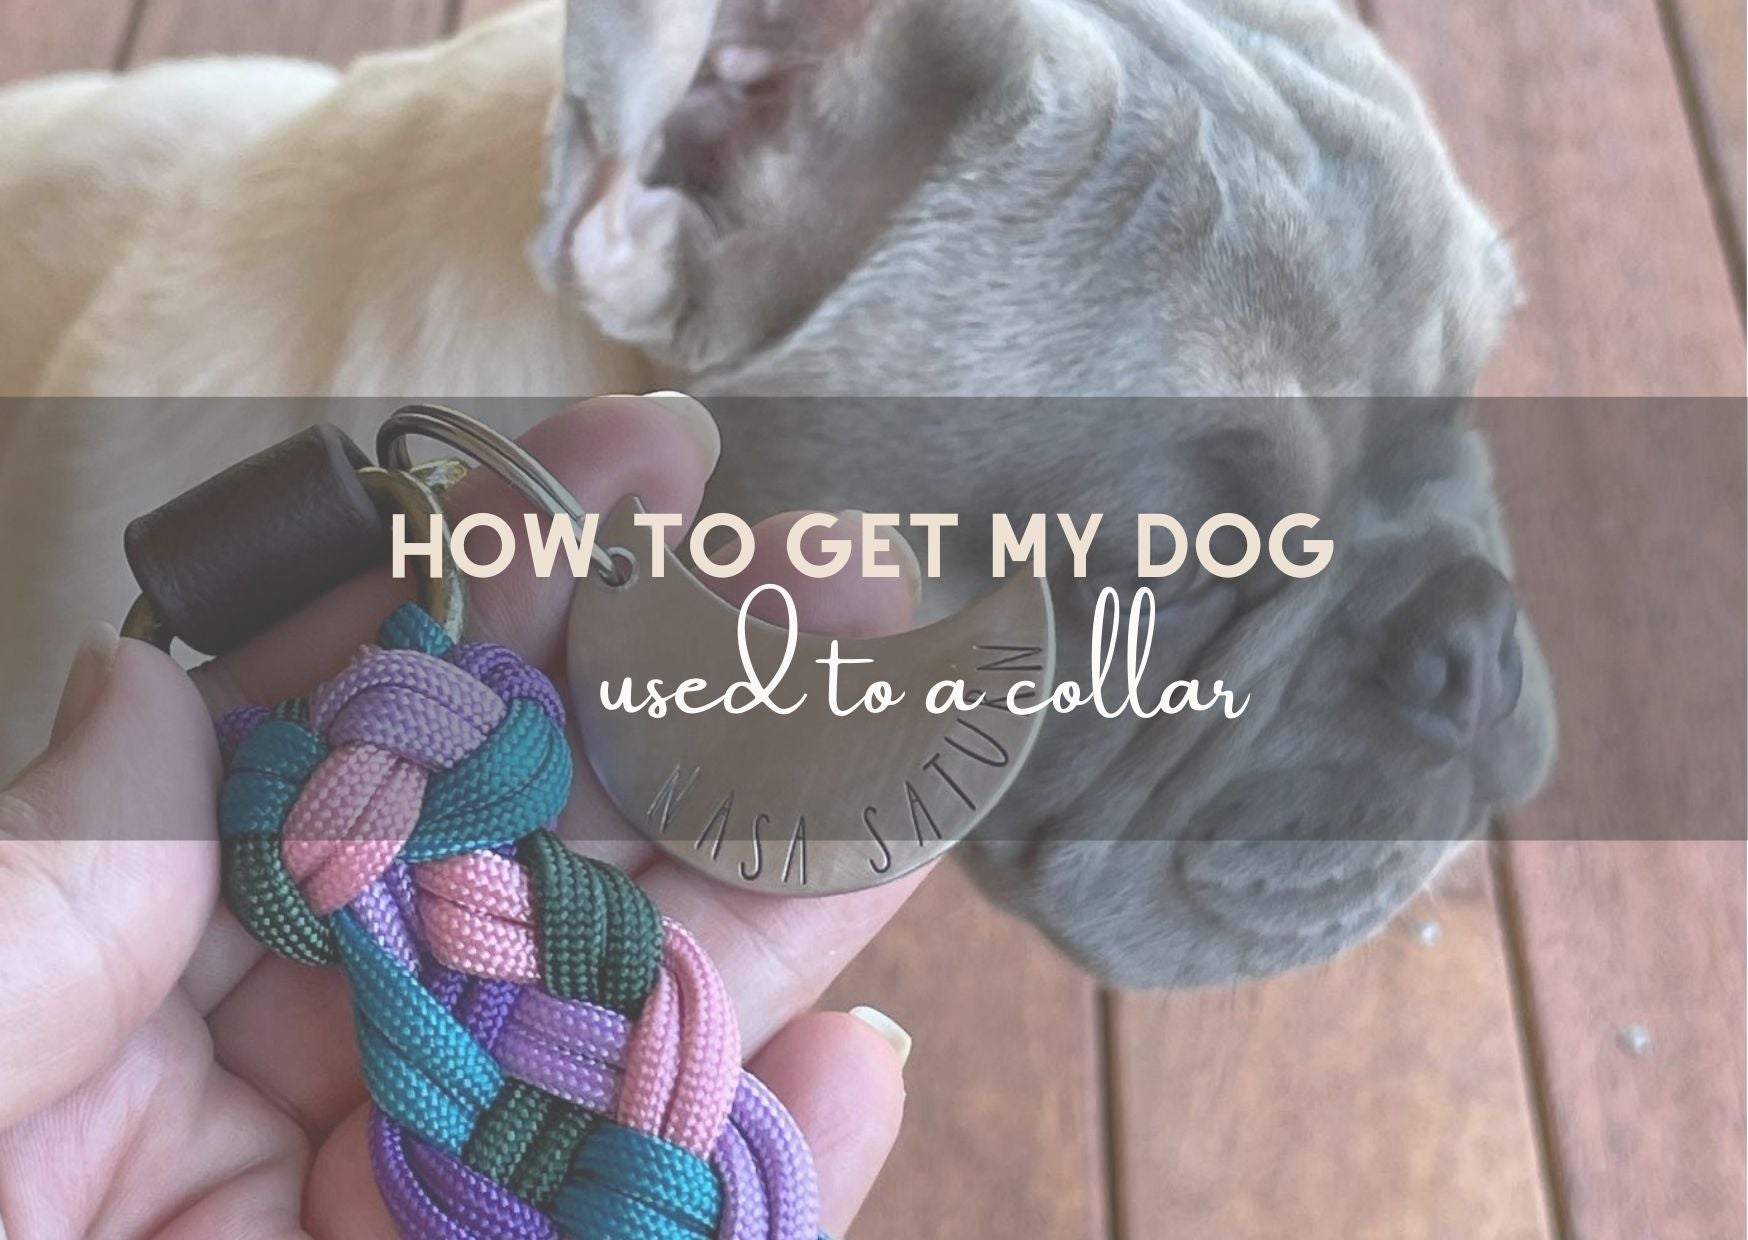 Guide: How to get my dog used to a Dog Collar